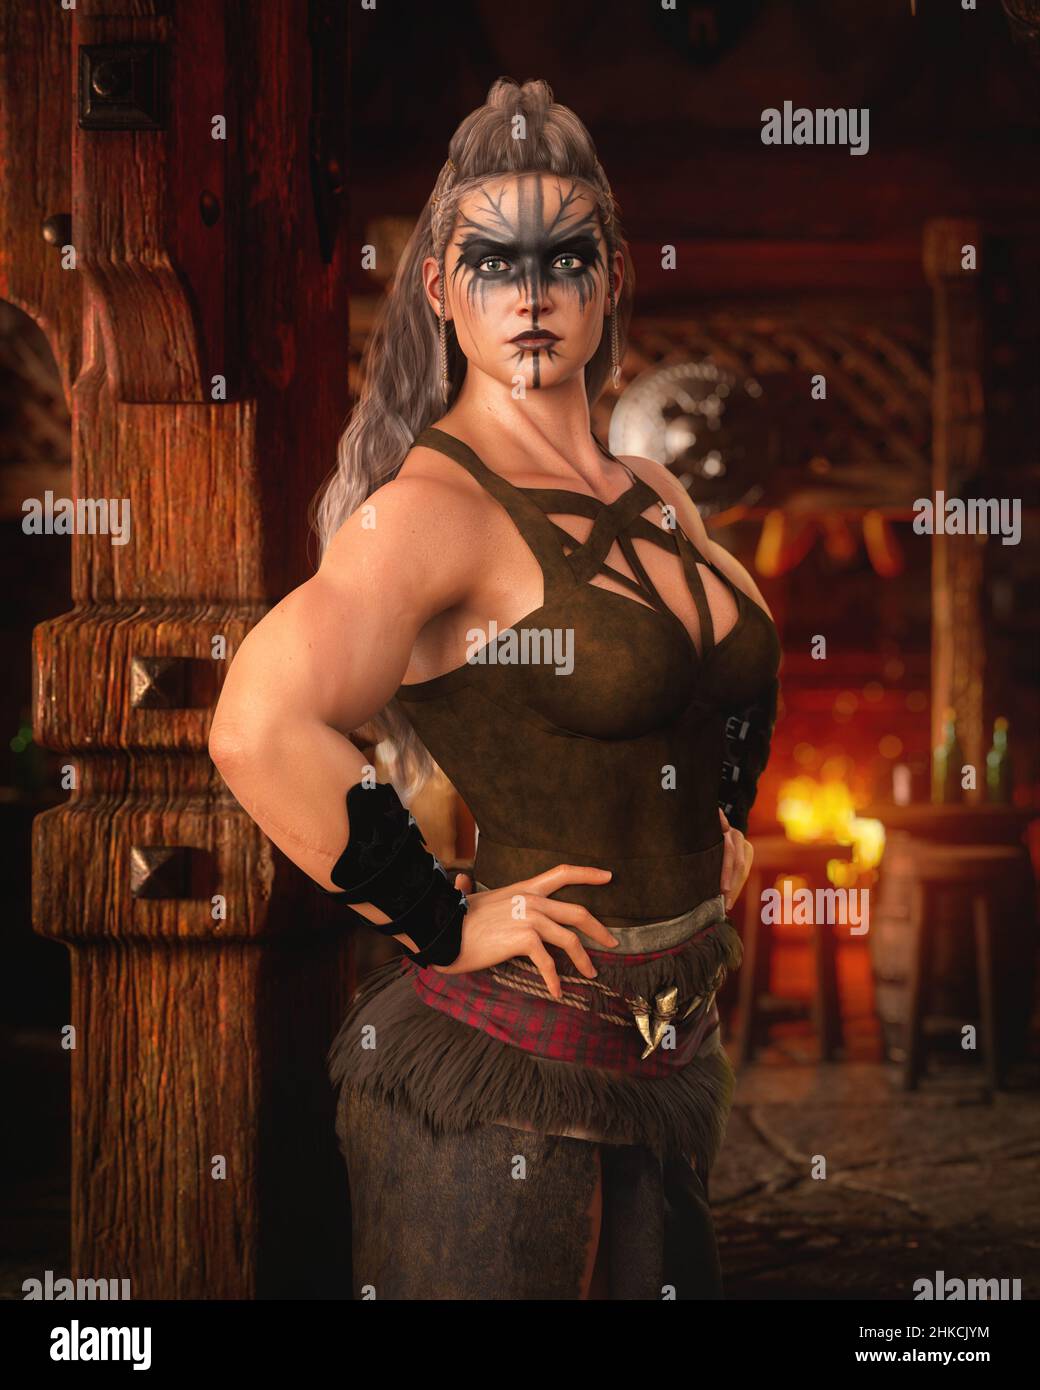 Strong muscular female Viking warrior with war paint on her face standing in a tavern bar. 3D rendering. Stock Photo